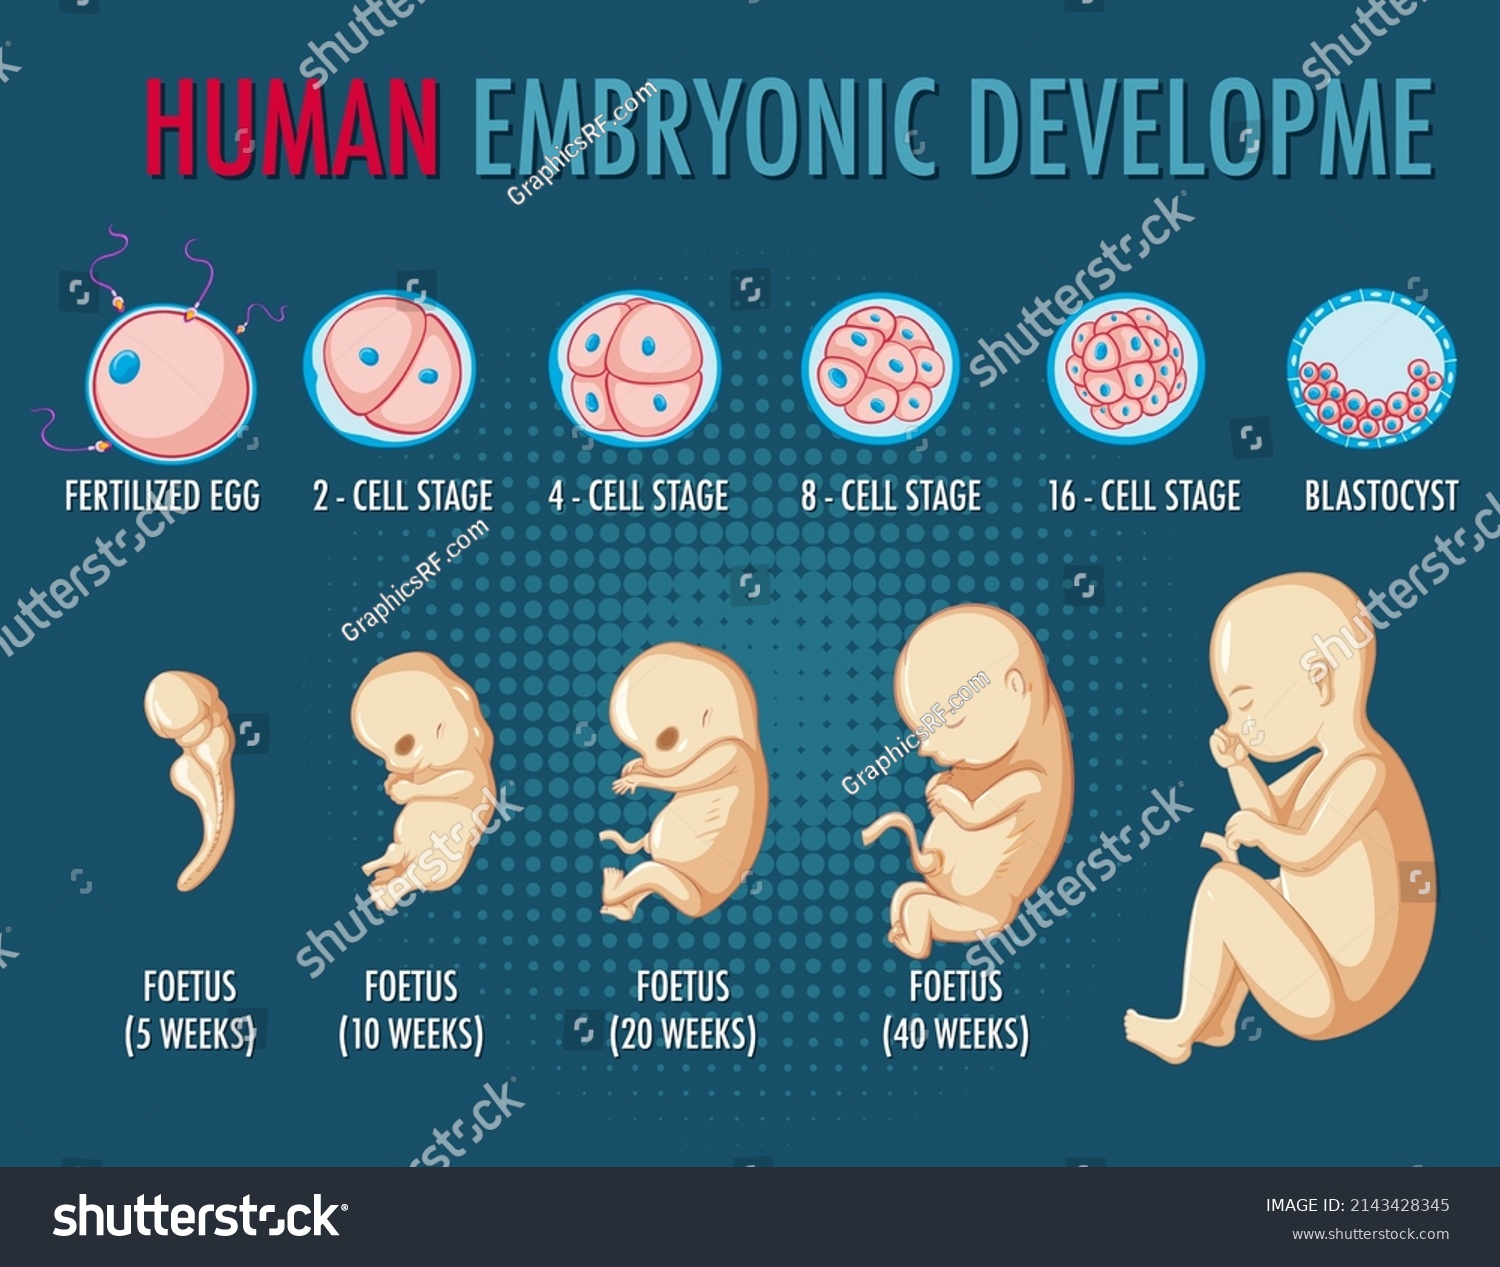 Human Embryonic Development Infographic Royalty Free Stock Vector 2143428345 